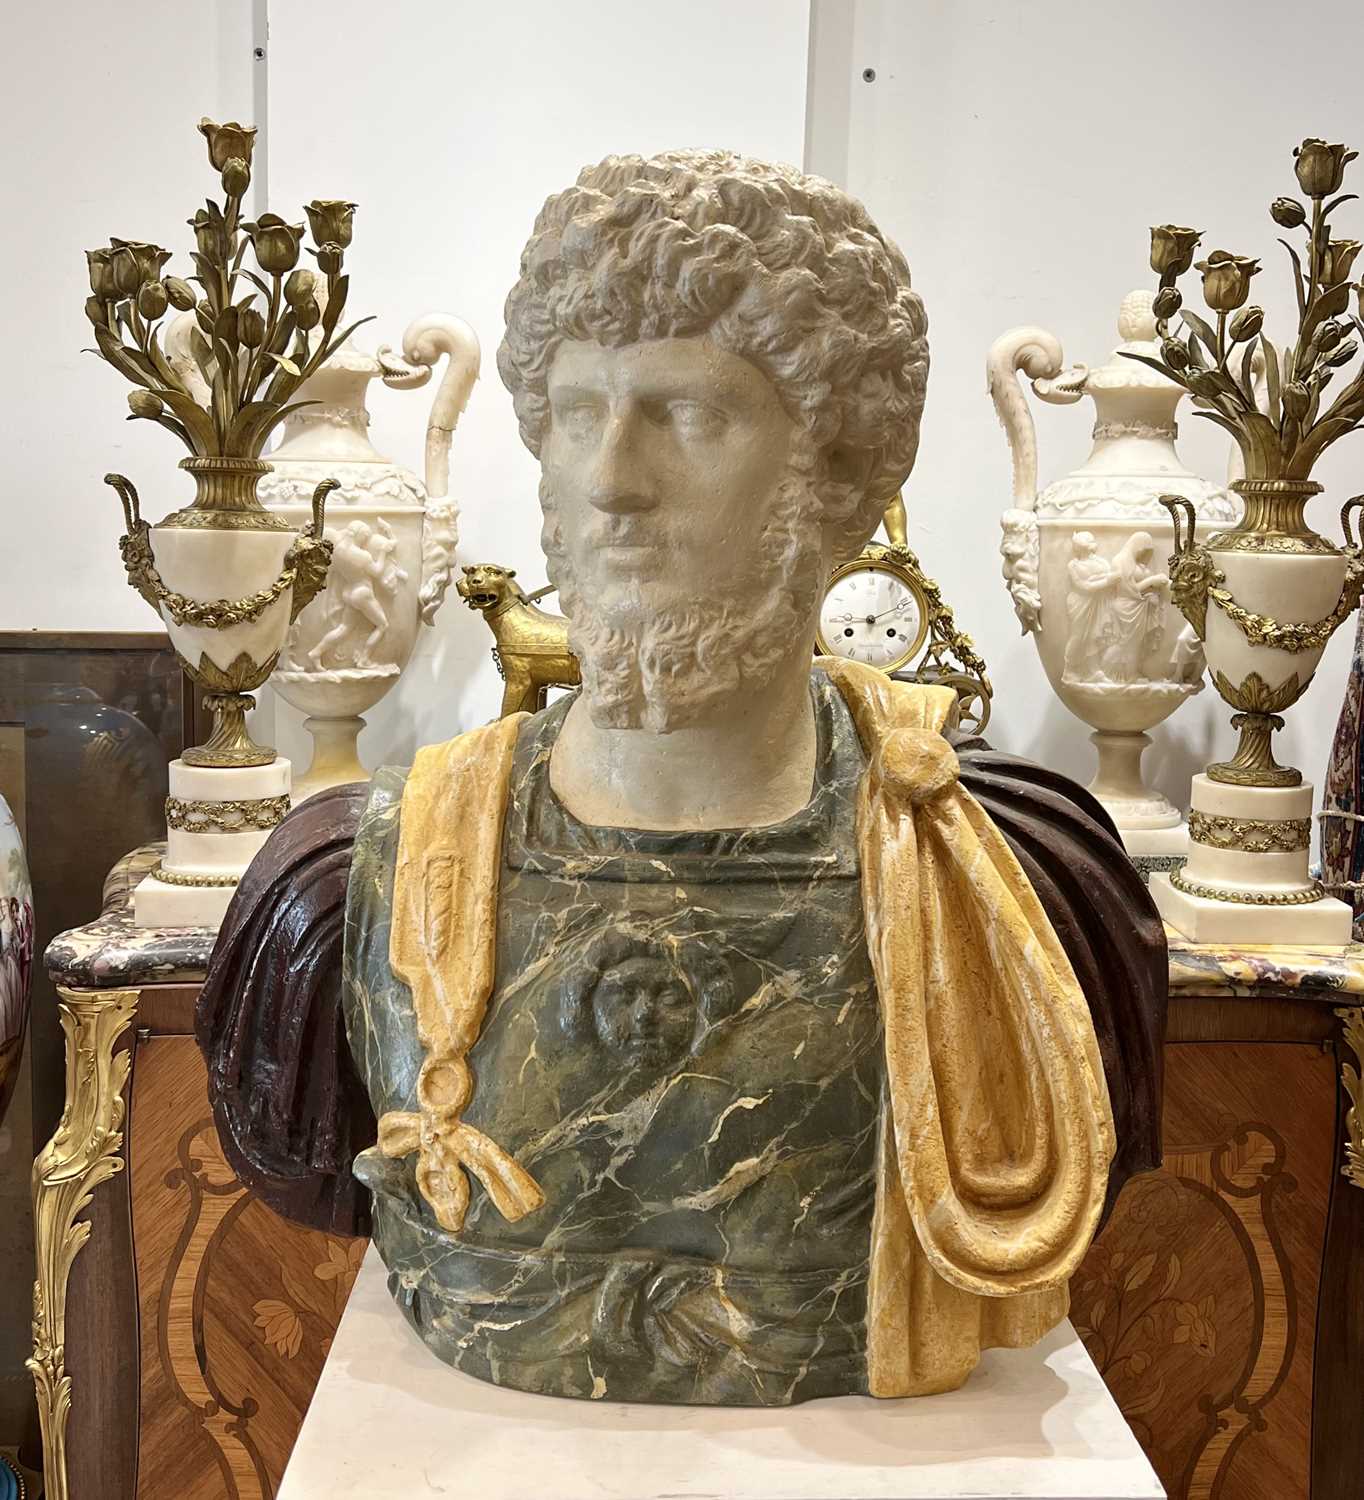 AFTER THE ANTIQUE: A LIFE-SIZE BUST OF ROMAN EMPEROR LUCIUS AELIUS